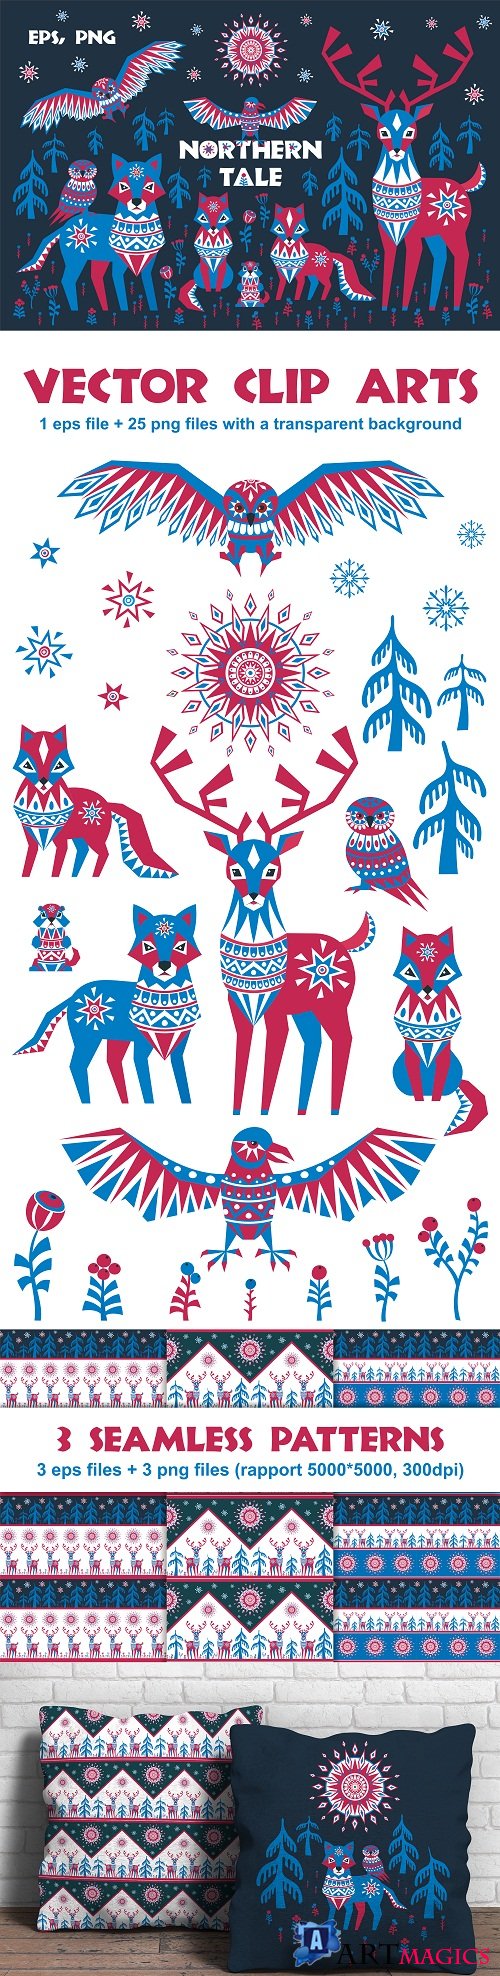 Northern tale. Arctic animals in Tribal style - 83300